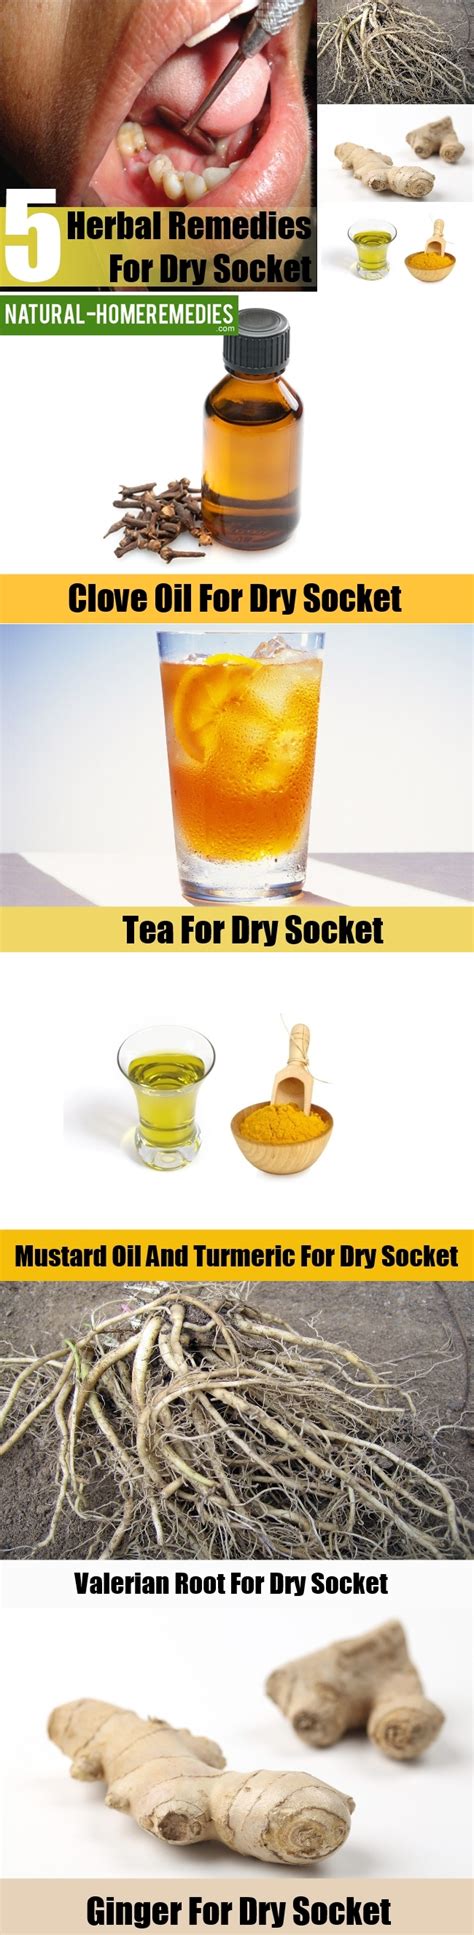 Dry Socket Herbal Remedies Treatments And Cures Natural Home